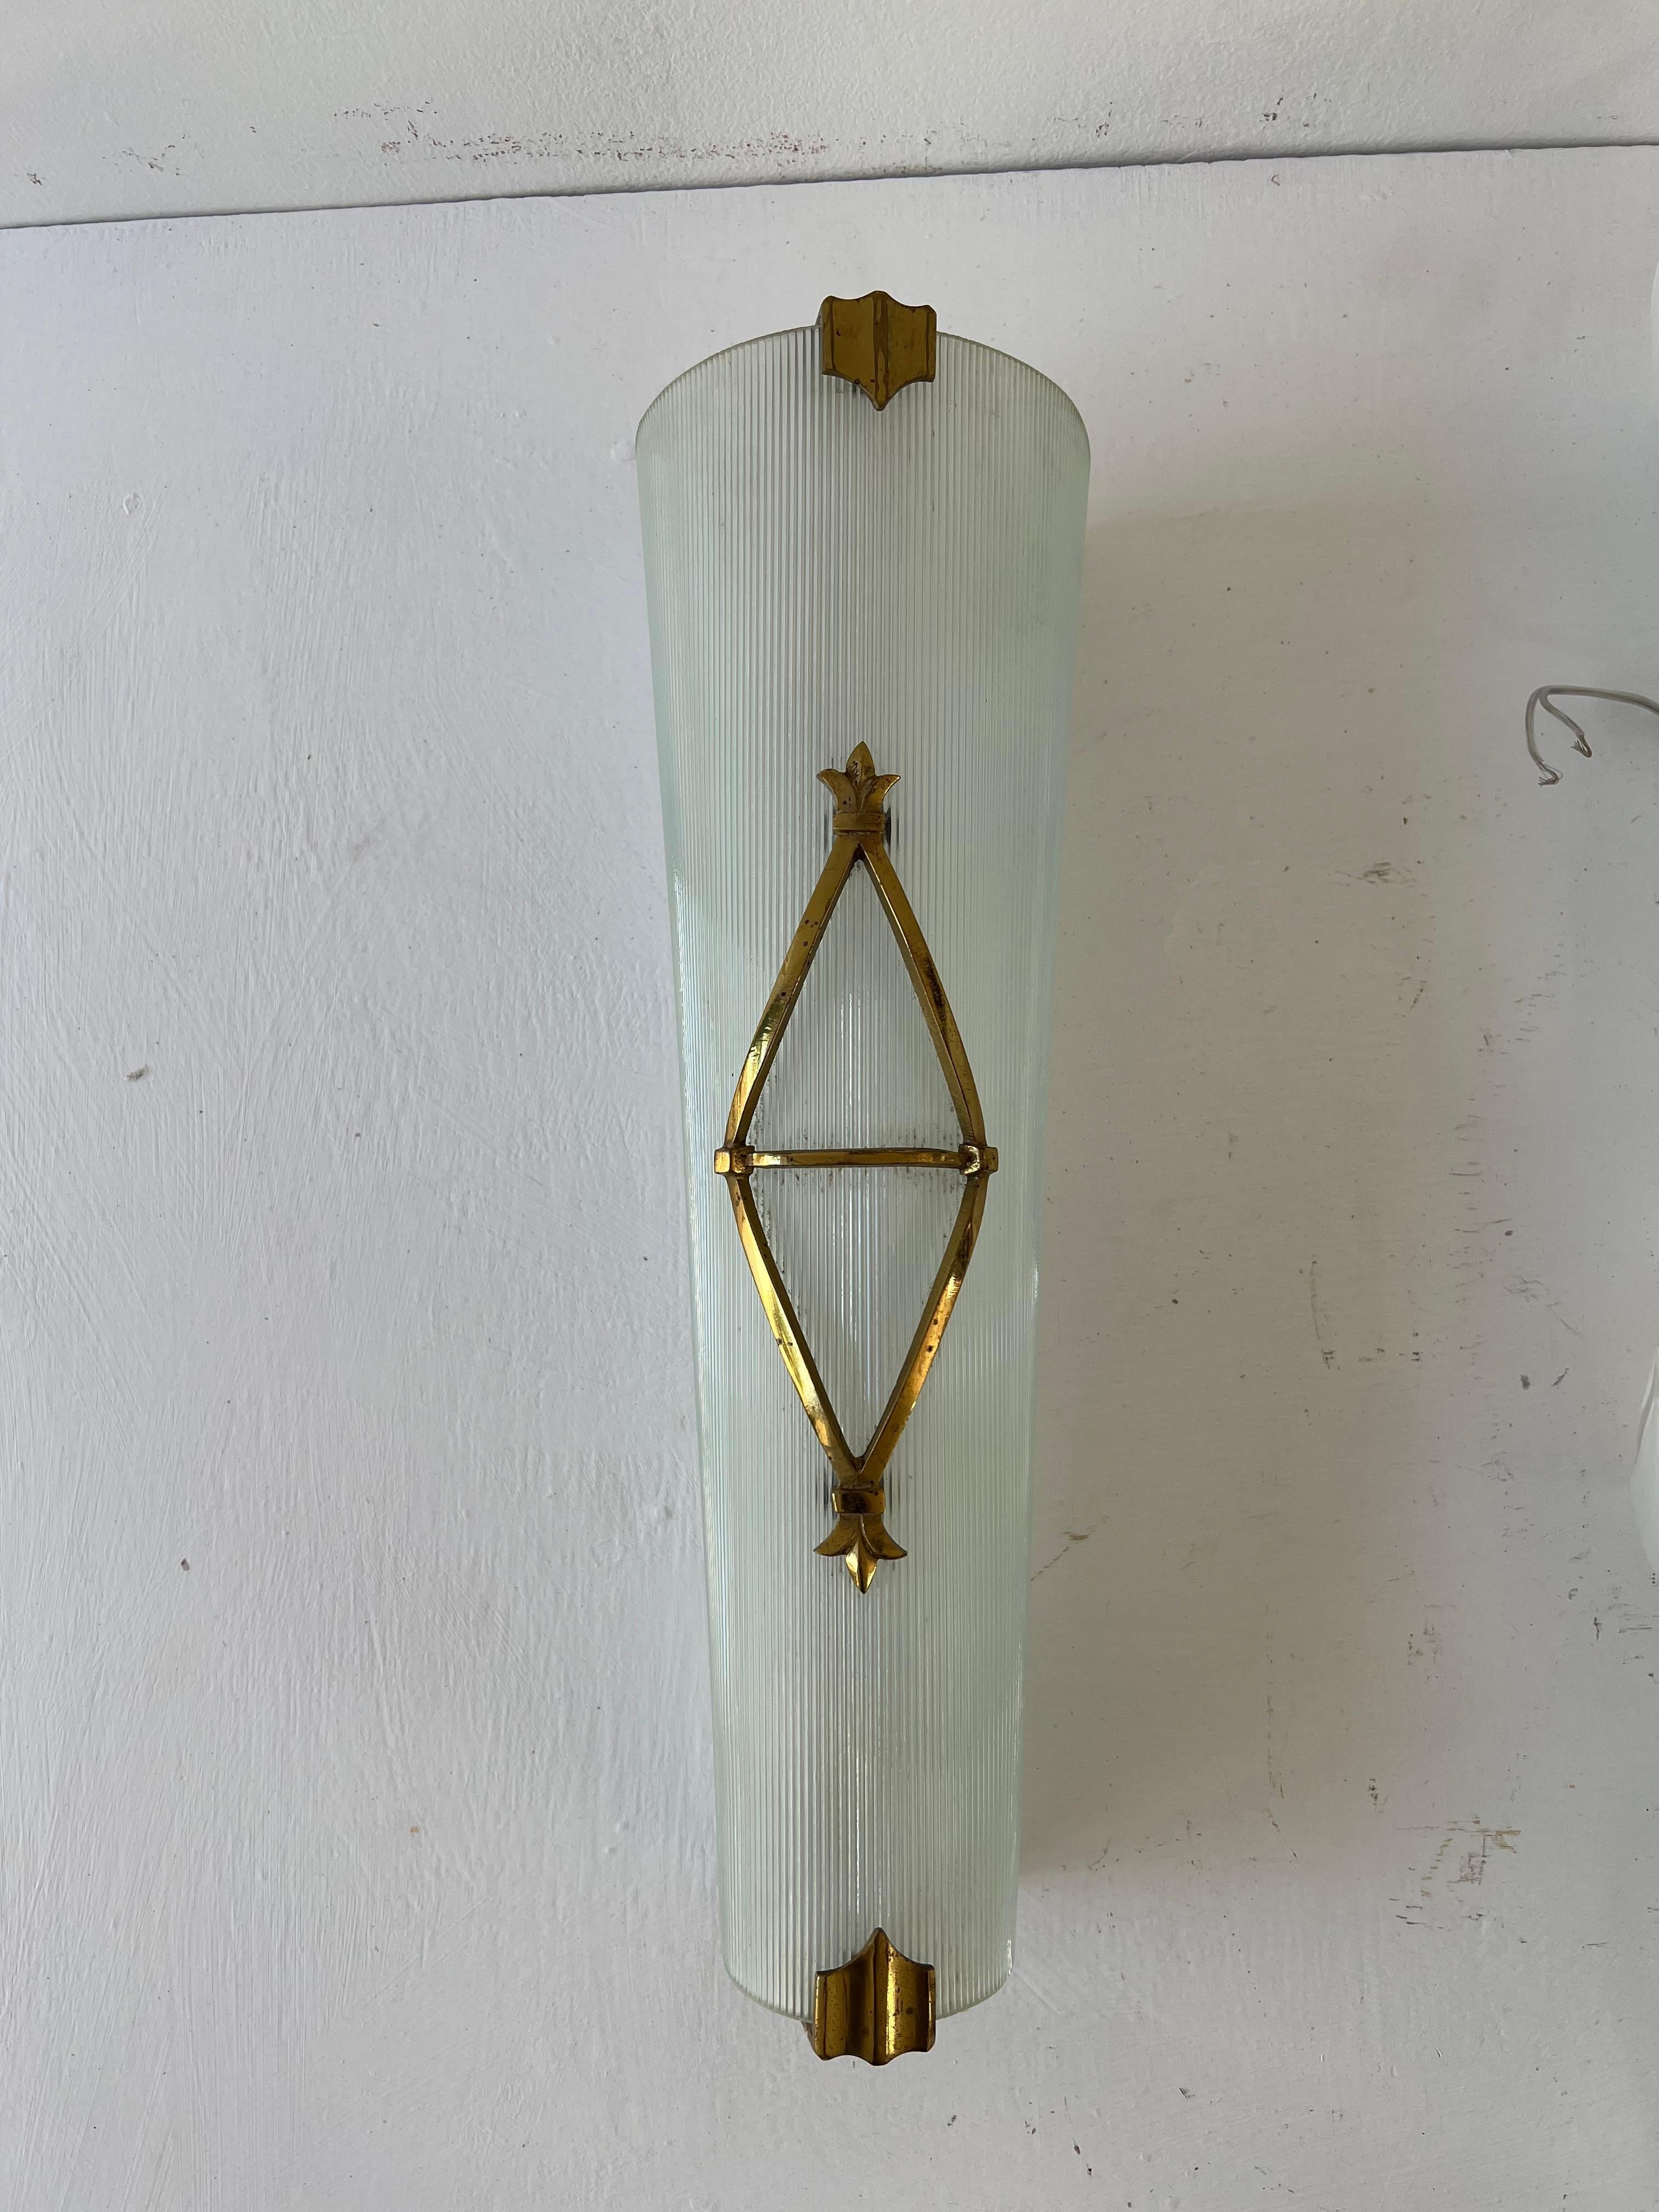 Large Art Deco Sconce in optical pressed glass and brass or bronze hardware, both 